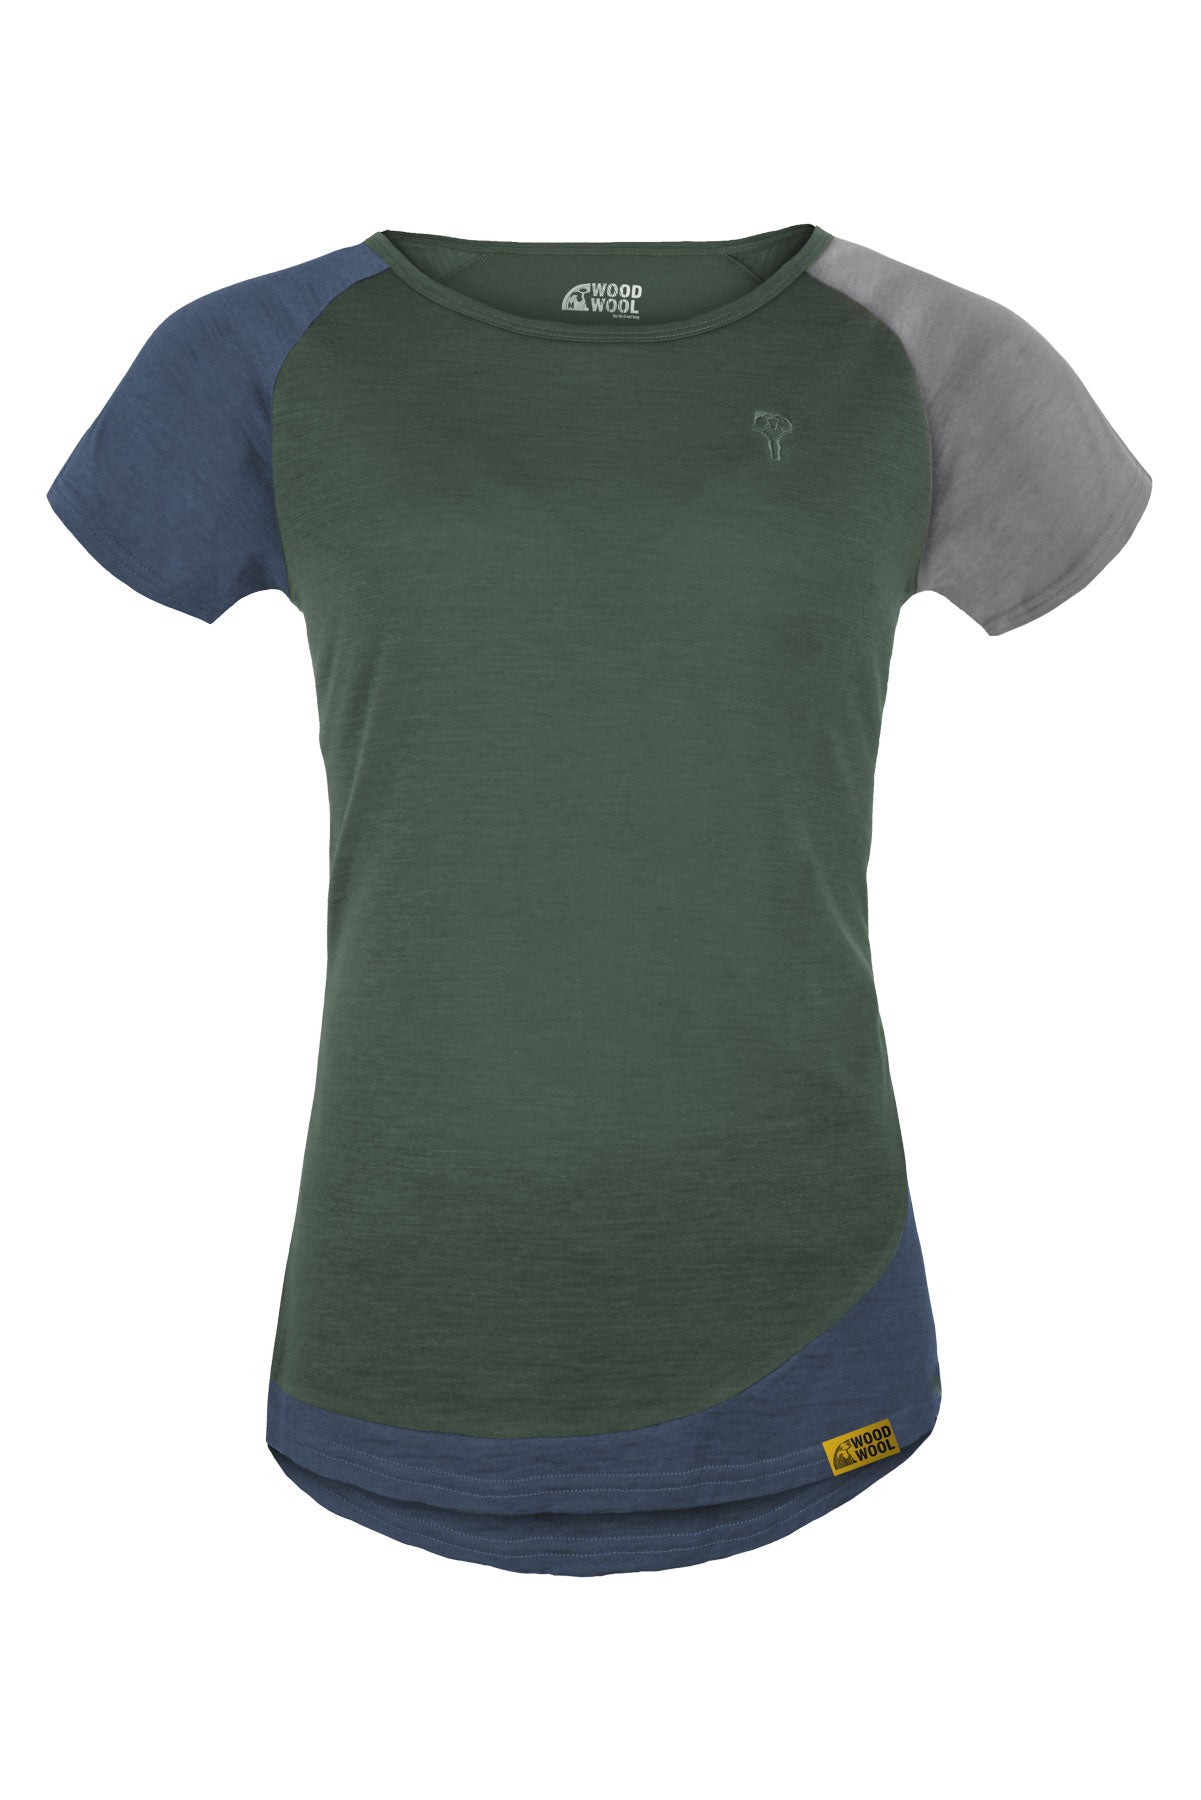 WoodWool T-Shirt Lady Janeway | Bayberry Green